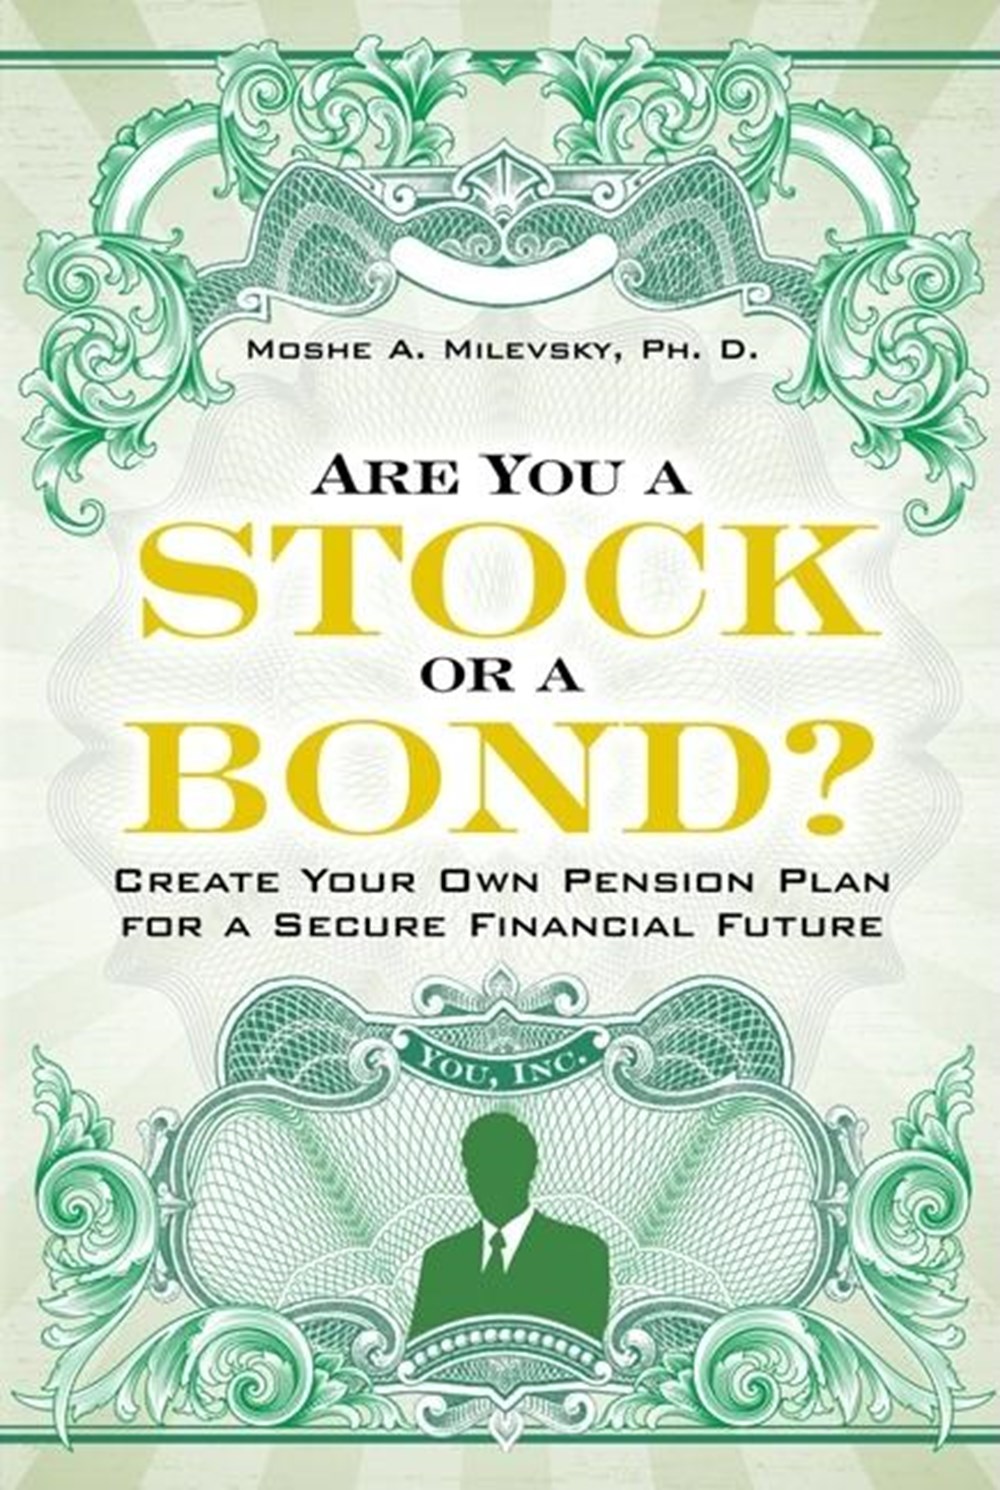 Are You a Stock or a Bond? Create Your Own Pension Plan for a Secure Financial Future